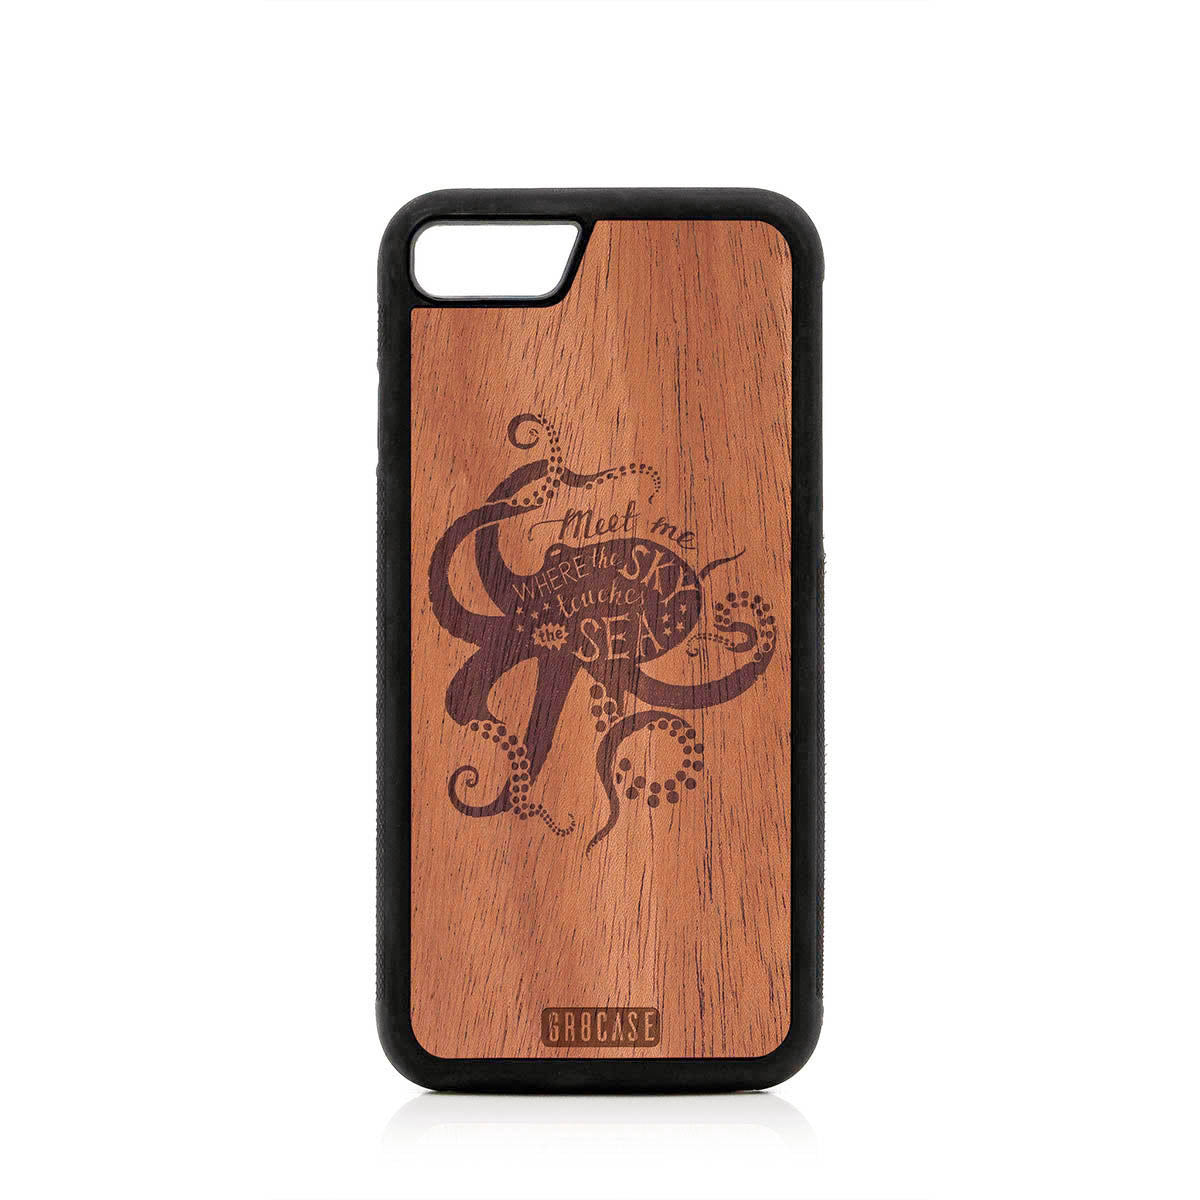 Meet Me Where The Sky Touches The Sea (Octopus) Design Wood Case For iPhone 7/8